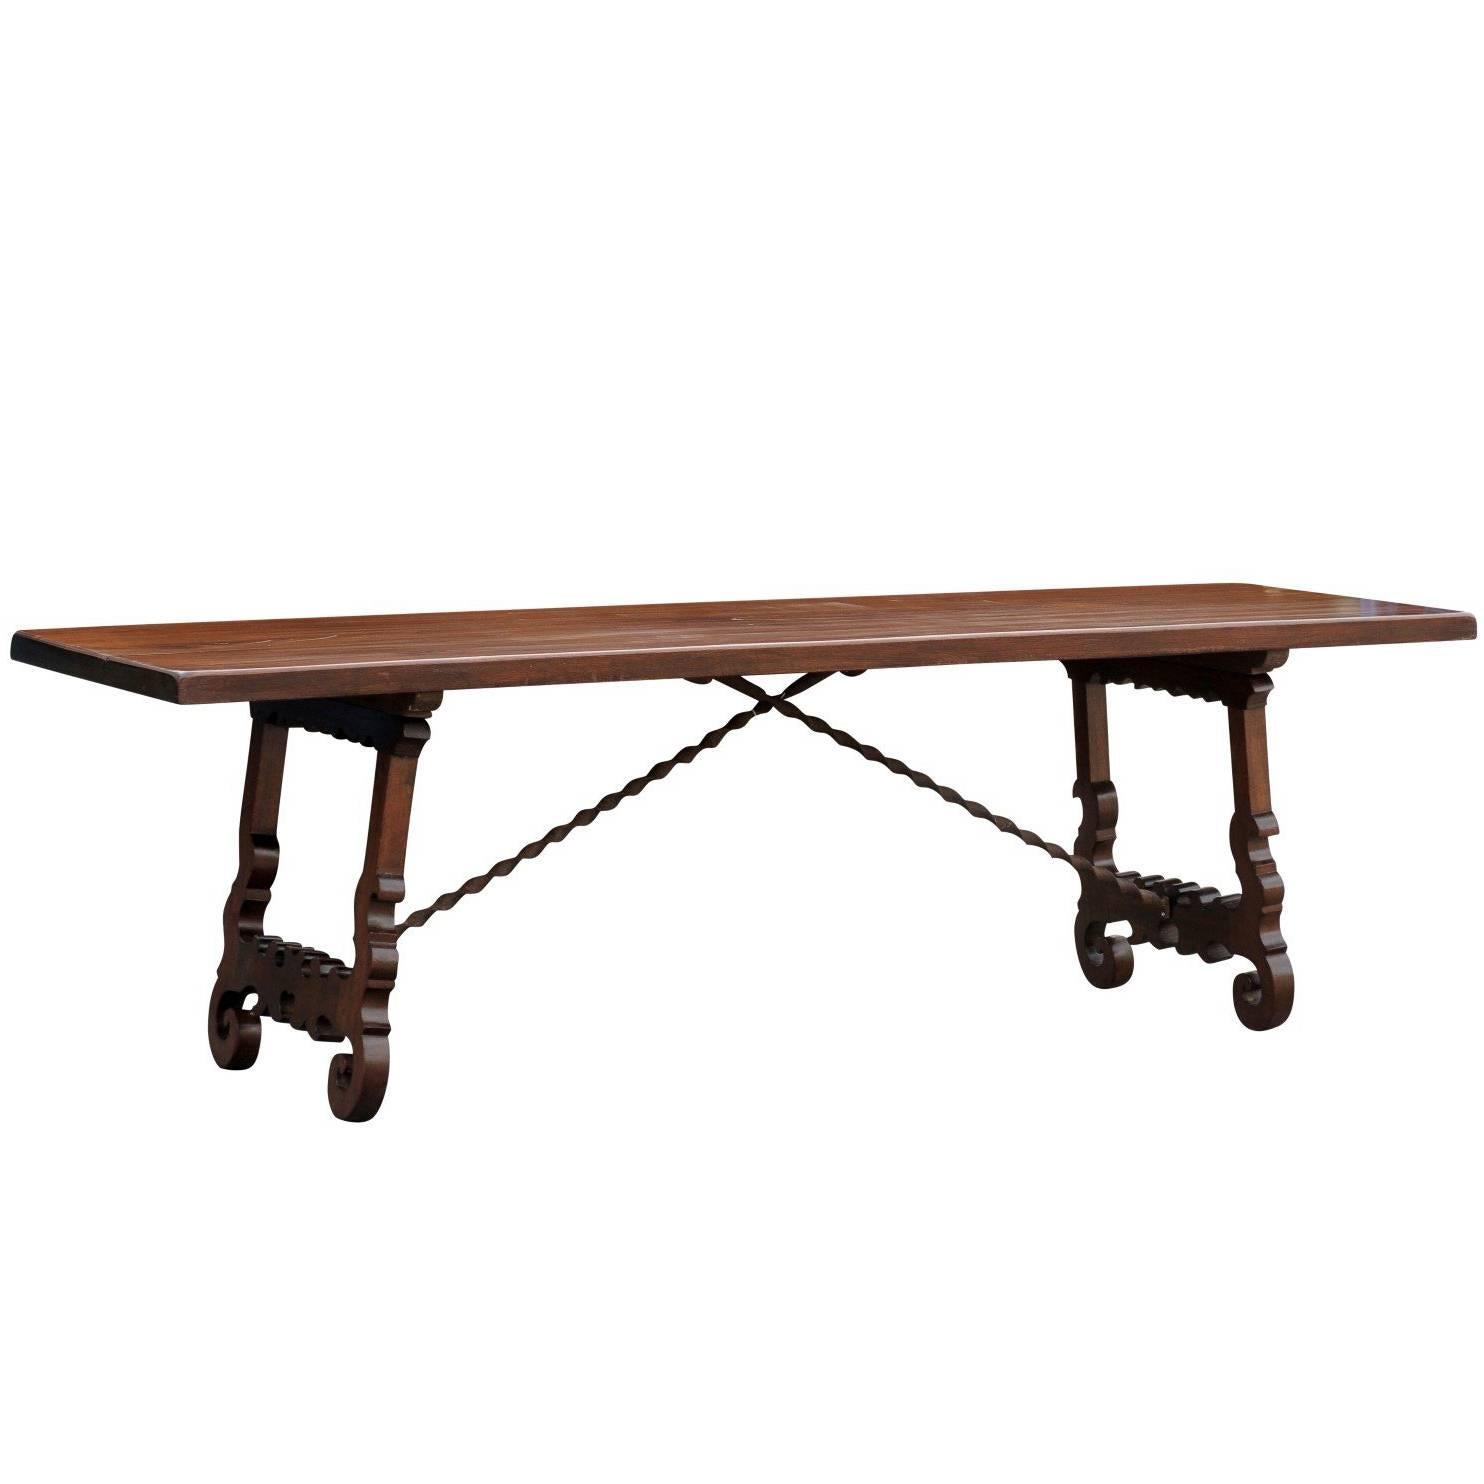 19th Century Italian Baroque Style Long Wooden Trestle Table with Iron Stretcher